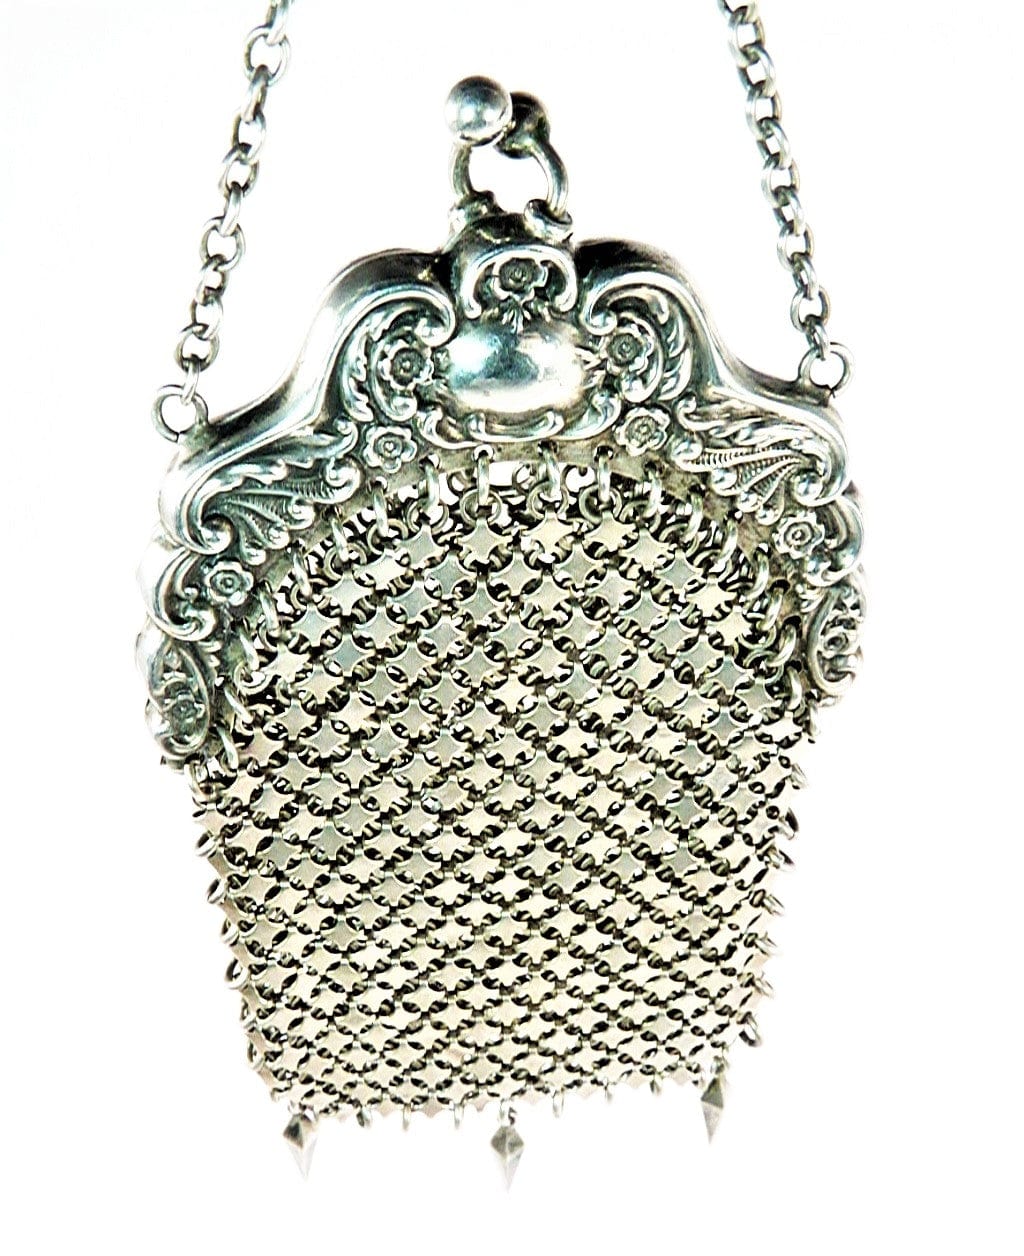 Antique E.A. Bliss Co Sterling Silver Mesh Coin Purse with Chain - Ruby Lane